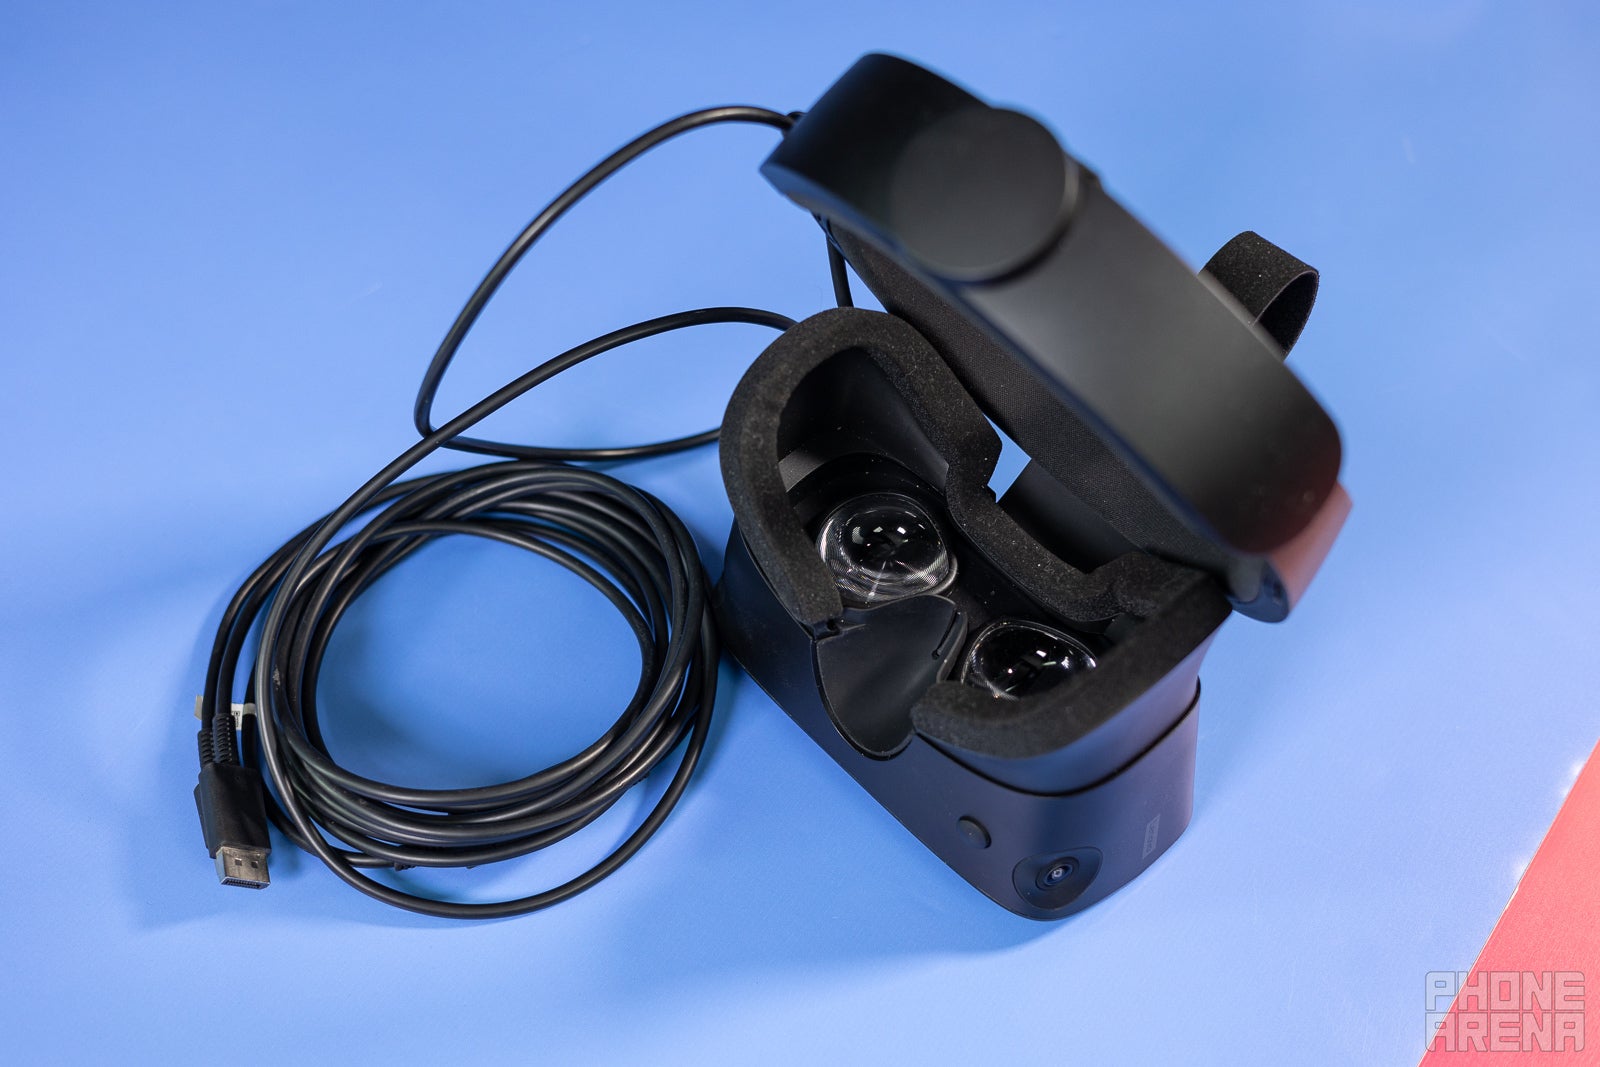 (Image Credit - PhoneArena) The Rift S is spaghetti galore; you&#039;ll have to deal with this thick cable with two ends - Meta Quest 2 vs Oculus Rift S: Which one should you buy? The standalone VR headset or the PCVR-only